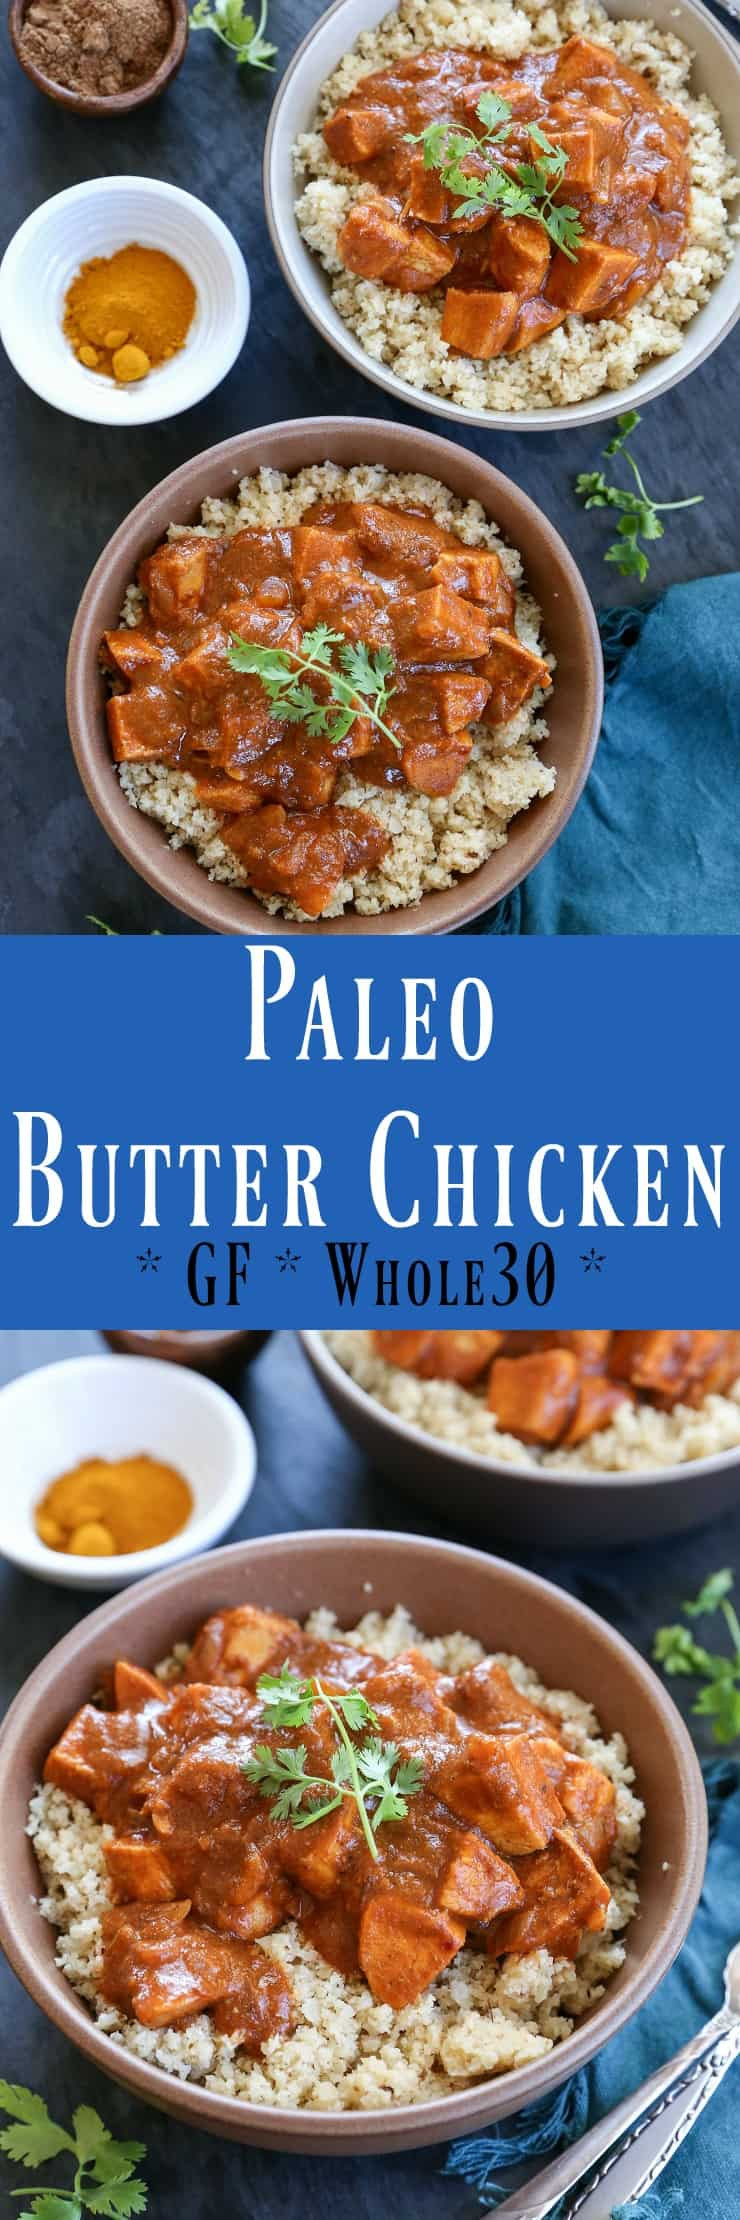 Paleo Diet Butter
 Paleo Butter Chicken The Roasted Root